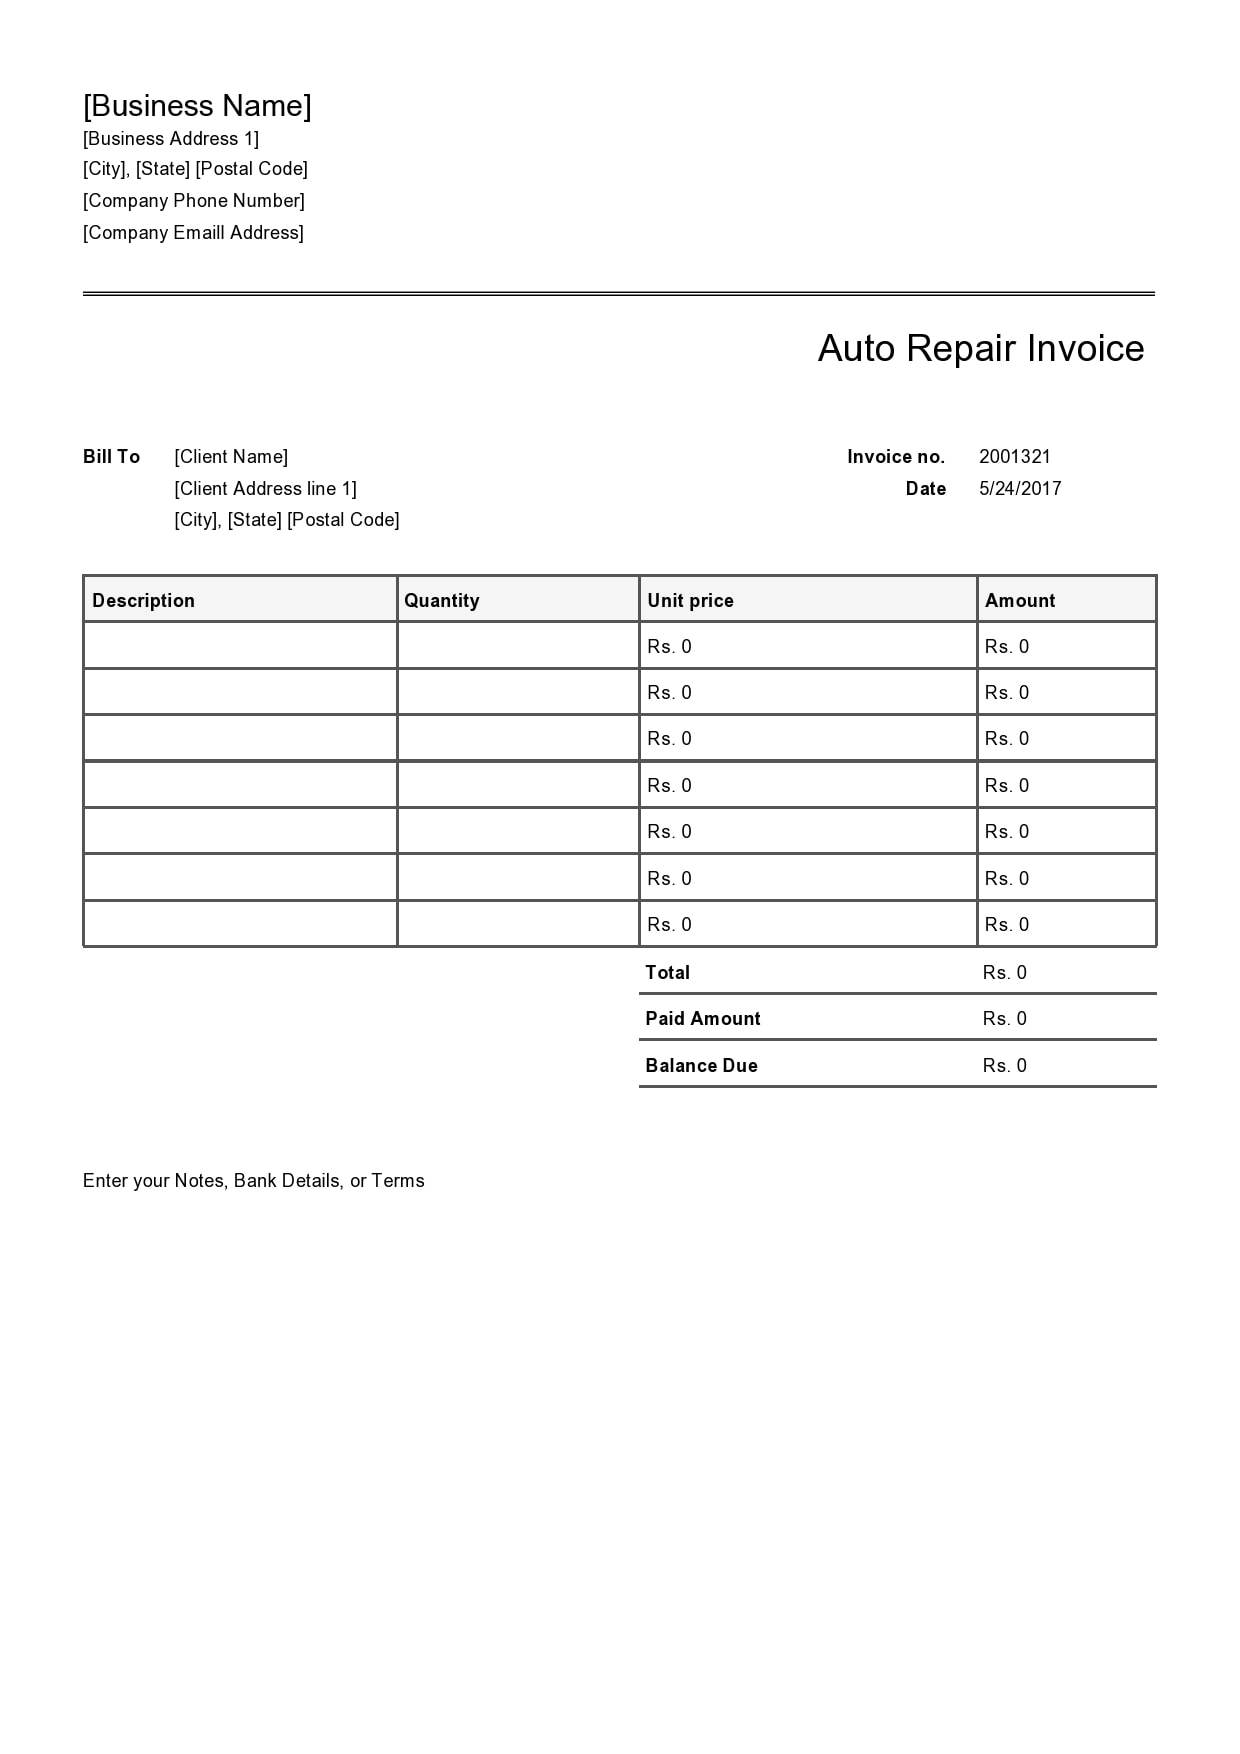 30 Real Fake Auto Repair Invoices Free Templatearchive